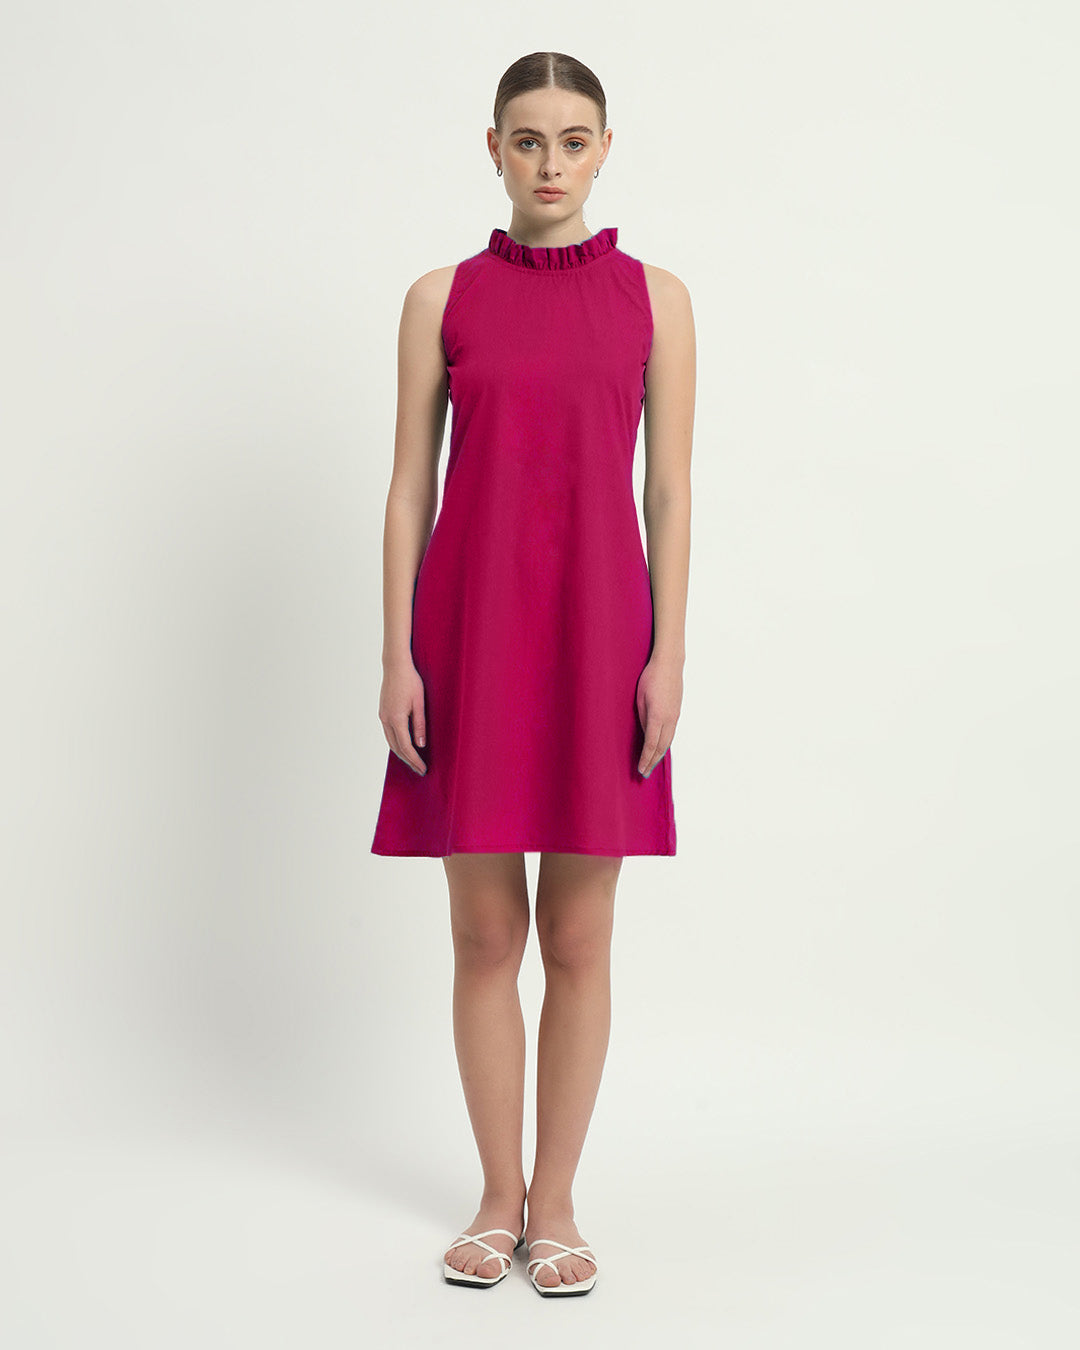 The Berry Angelica Cotton Dress